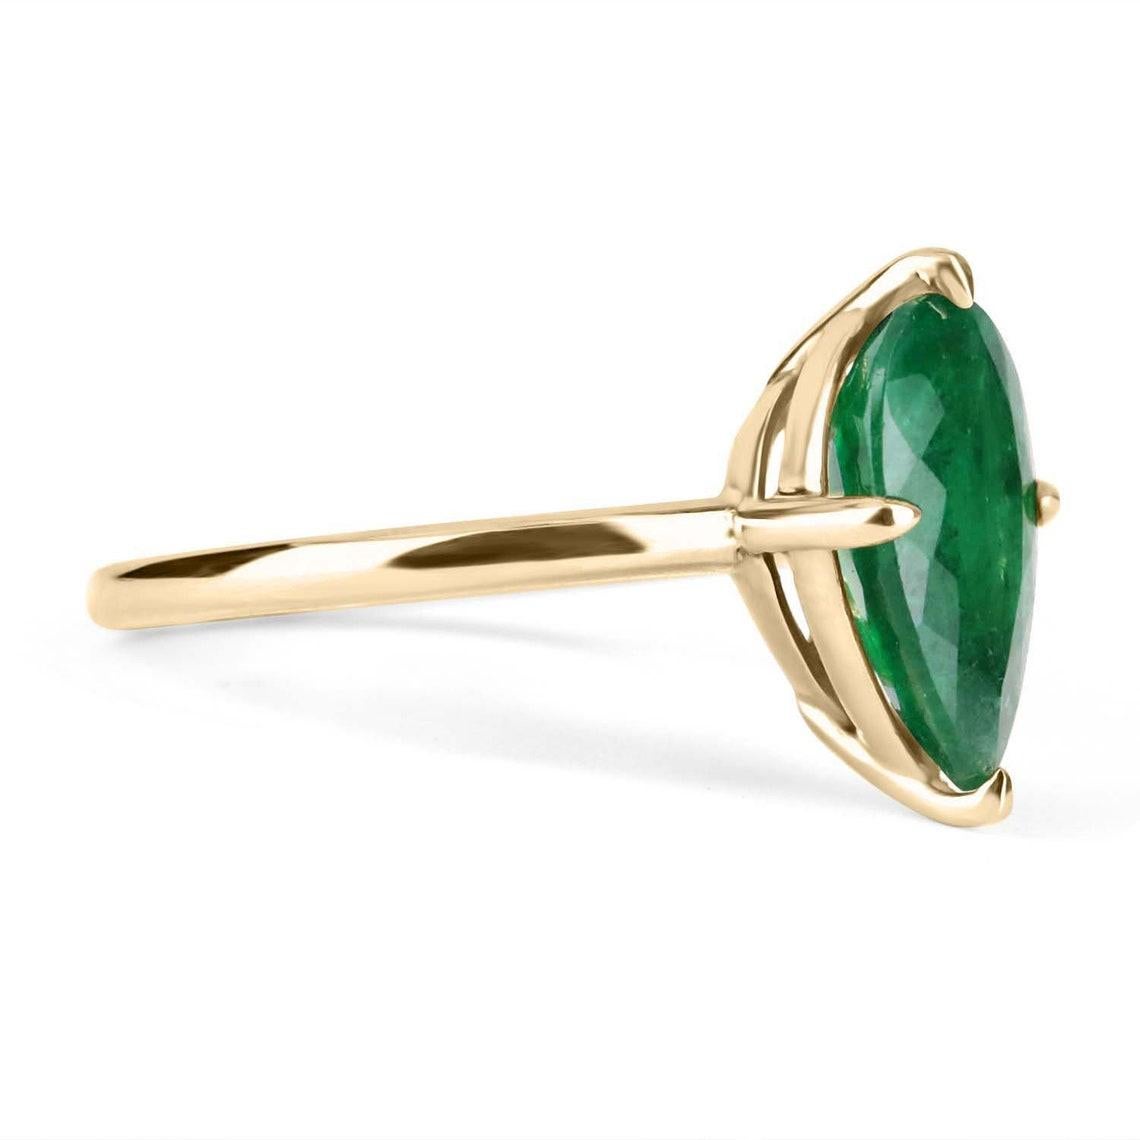 Displayed is a custom emerald solitaire pear-cut engagement/right-hand ring in 14K yellow gold. This gorgeous solitaire ring carries a 2.37-carat emerald in a four prong setting. The emerald has very good clarity with minor flaws that are normal in